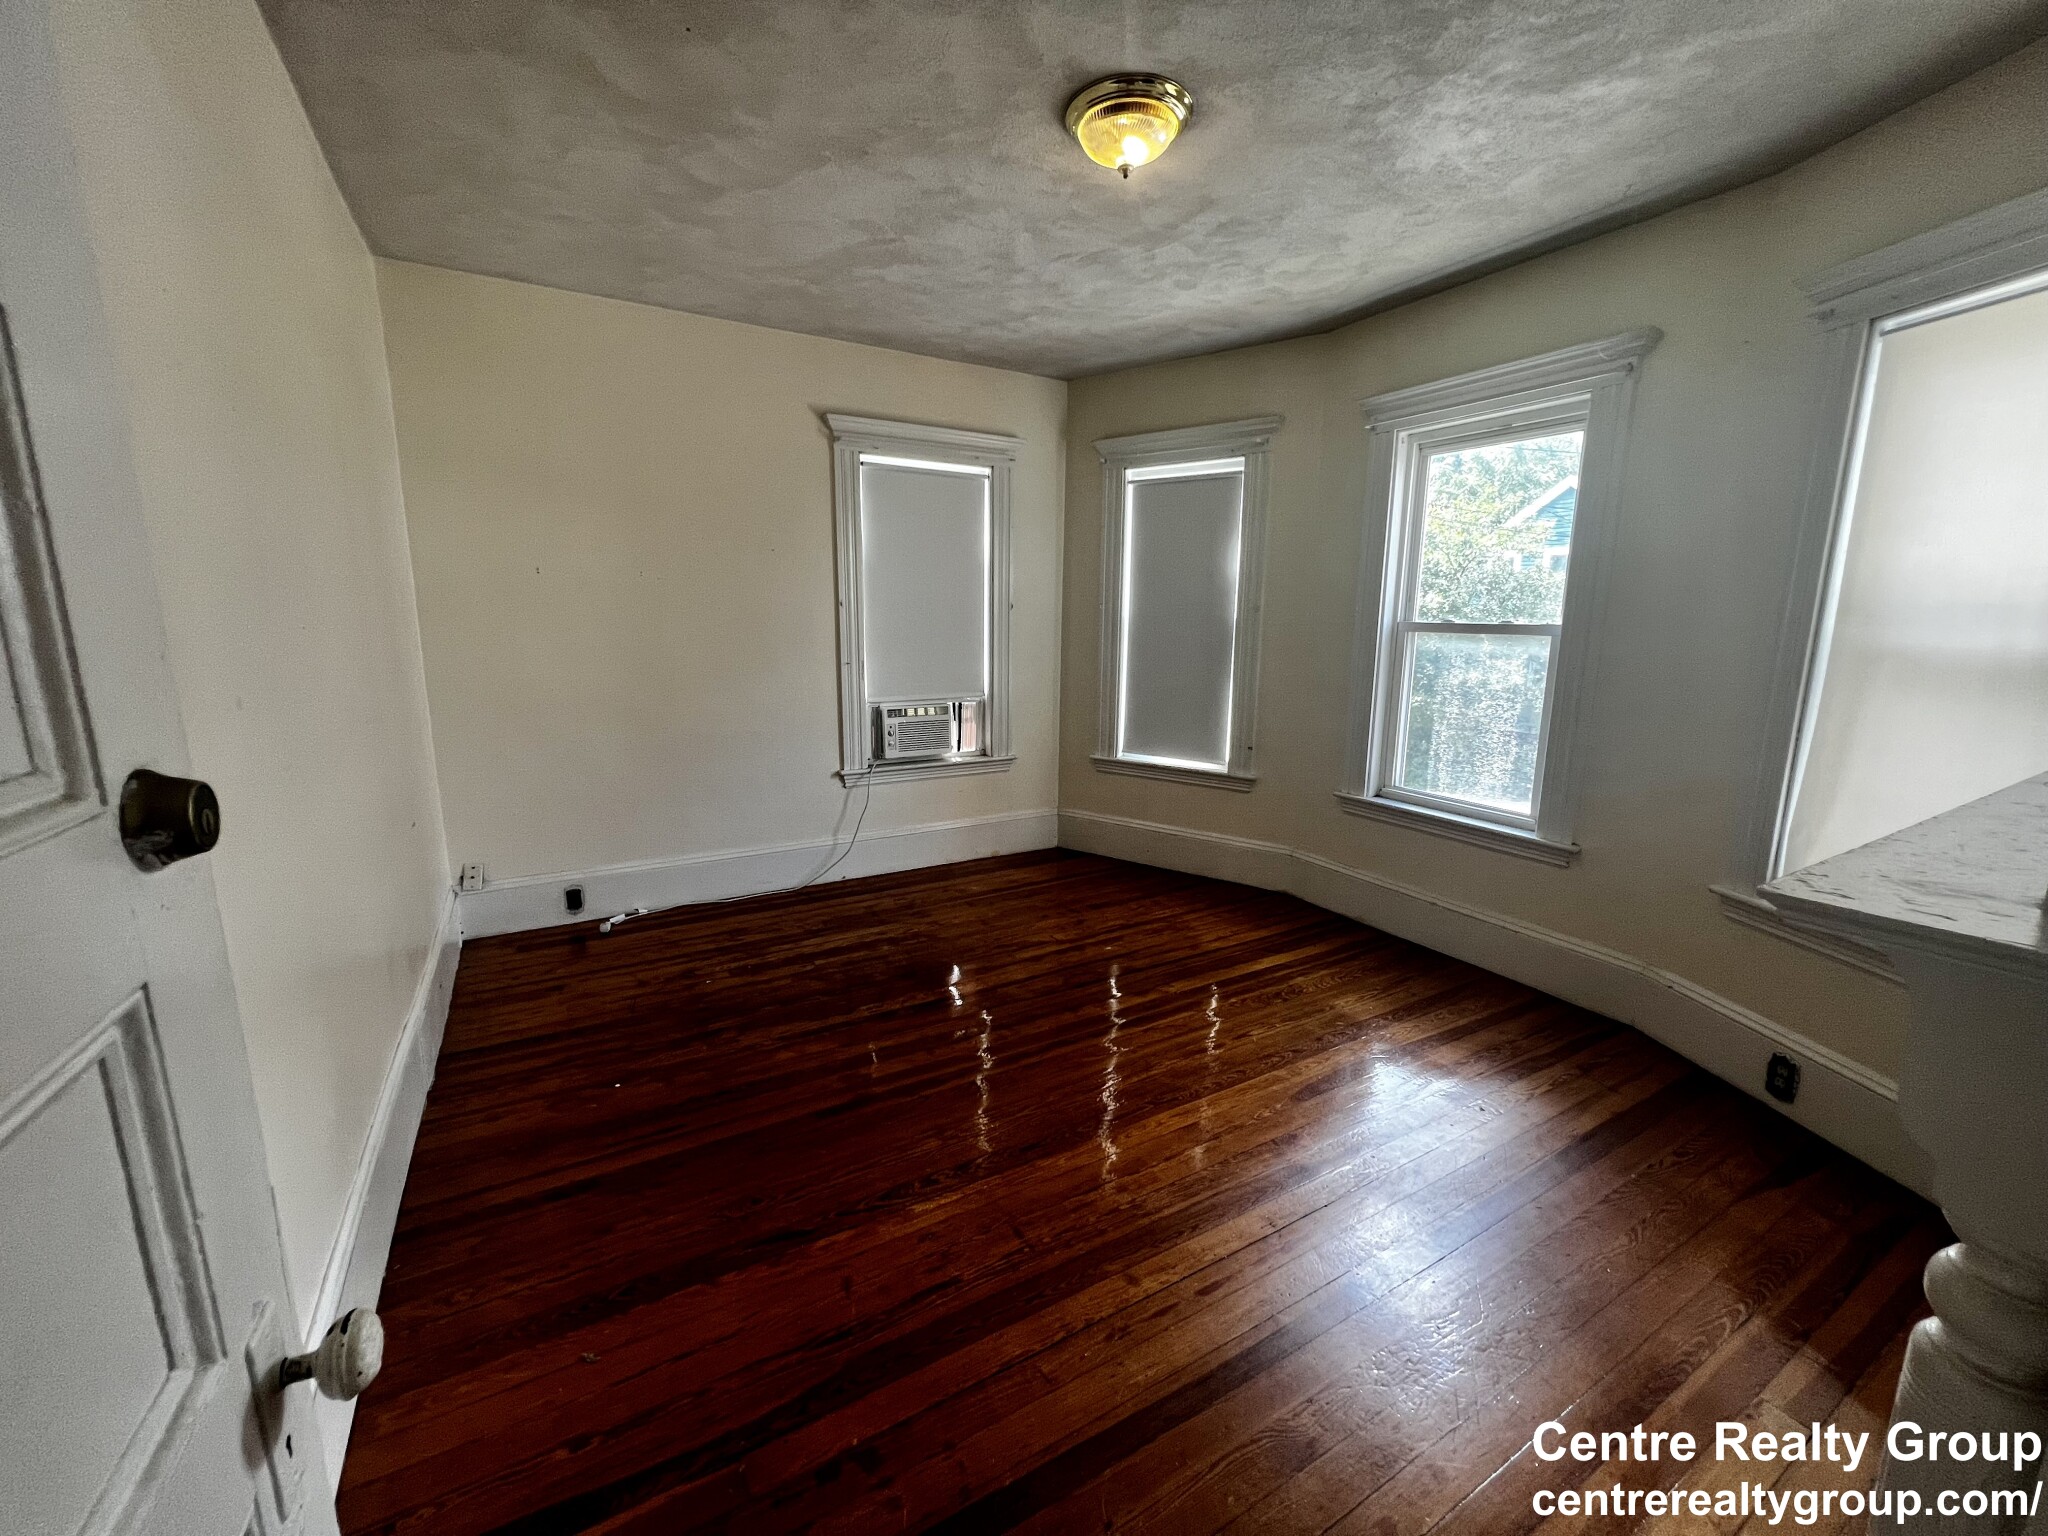 Photos of apartment on Sycamore St.,Somerville MA 02145